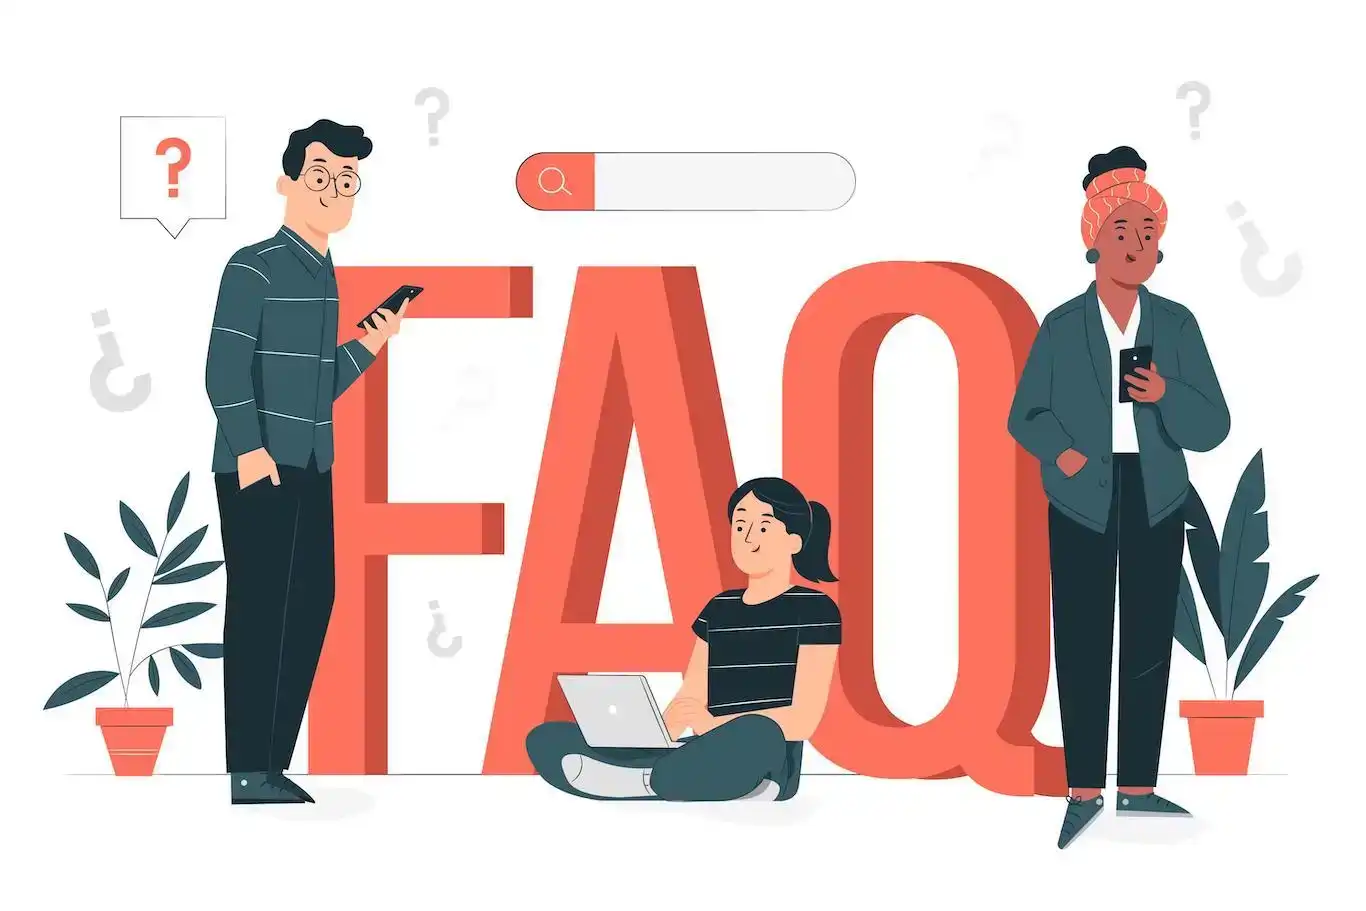 An illustration showing people checking out the FAQ section.